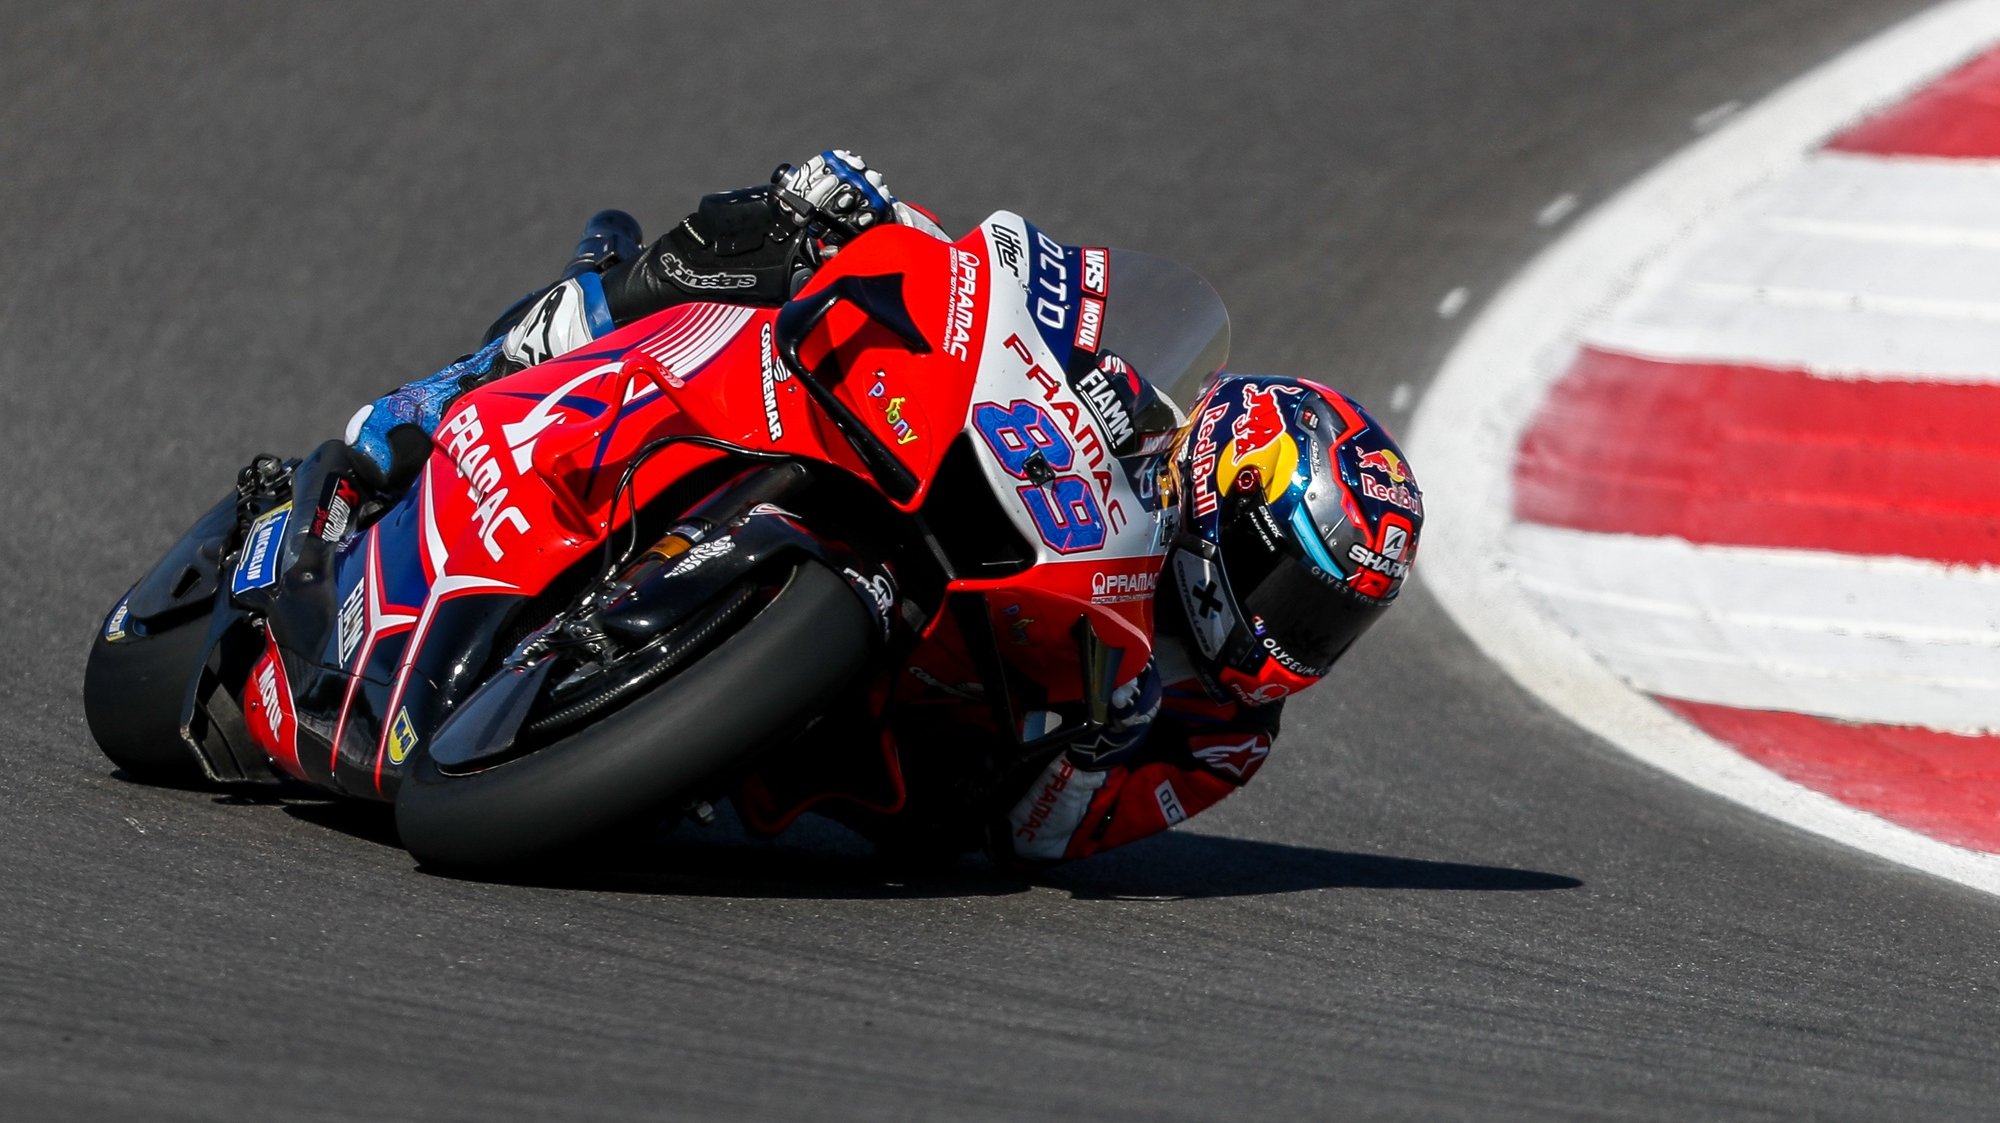 Spanish rider of Ducati Lenovo team, Jorge Martin, during the third MotoGP free training session for the Motorcycling Grand Prix of Portugal at Algarve International race track, south of Portugal, 17 April 2021. The Motorcycling Grand Prix of Portugal will take place on 18 April 2021.JOSE SENA GOULAO/LUSA